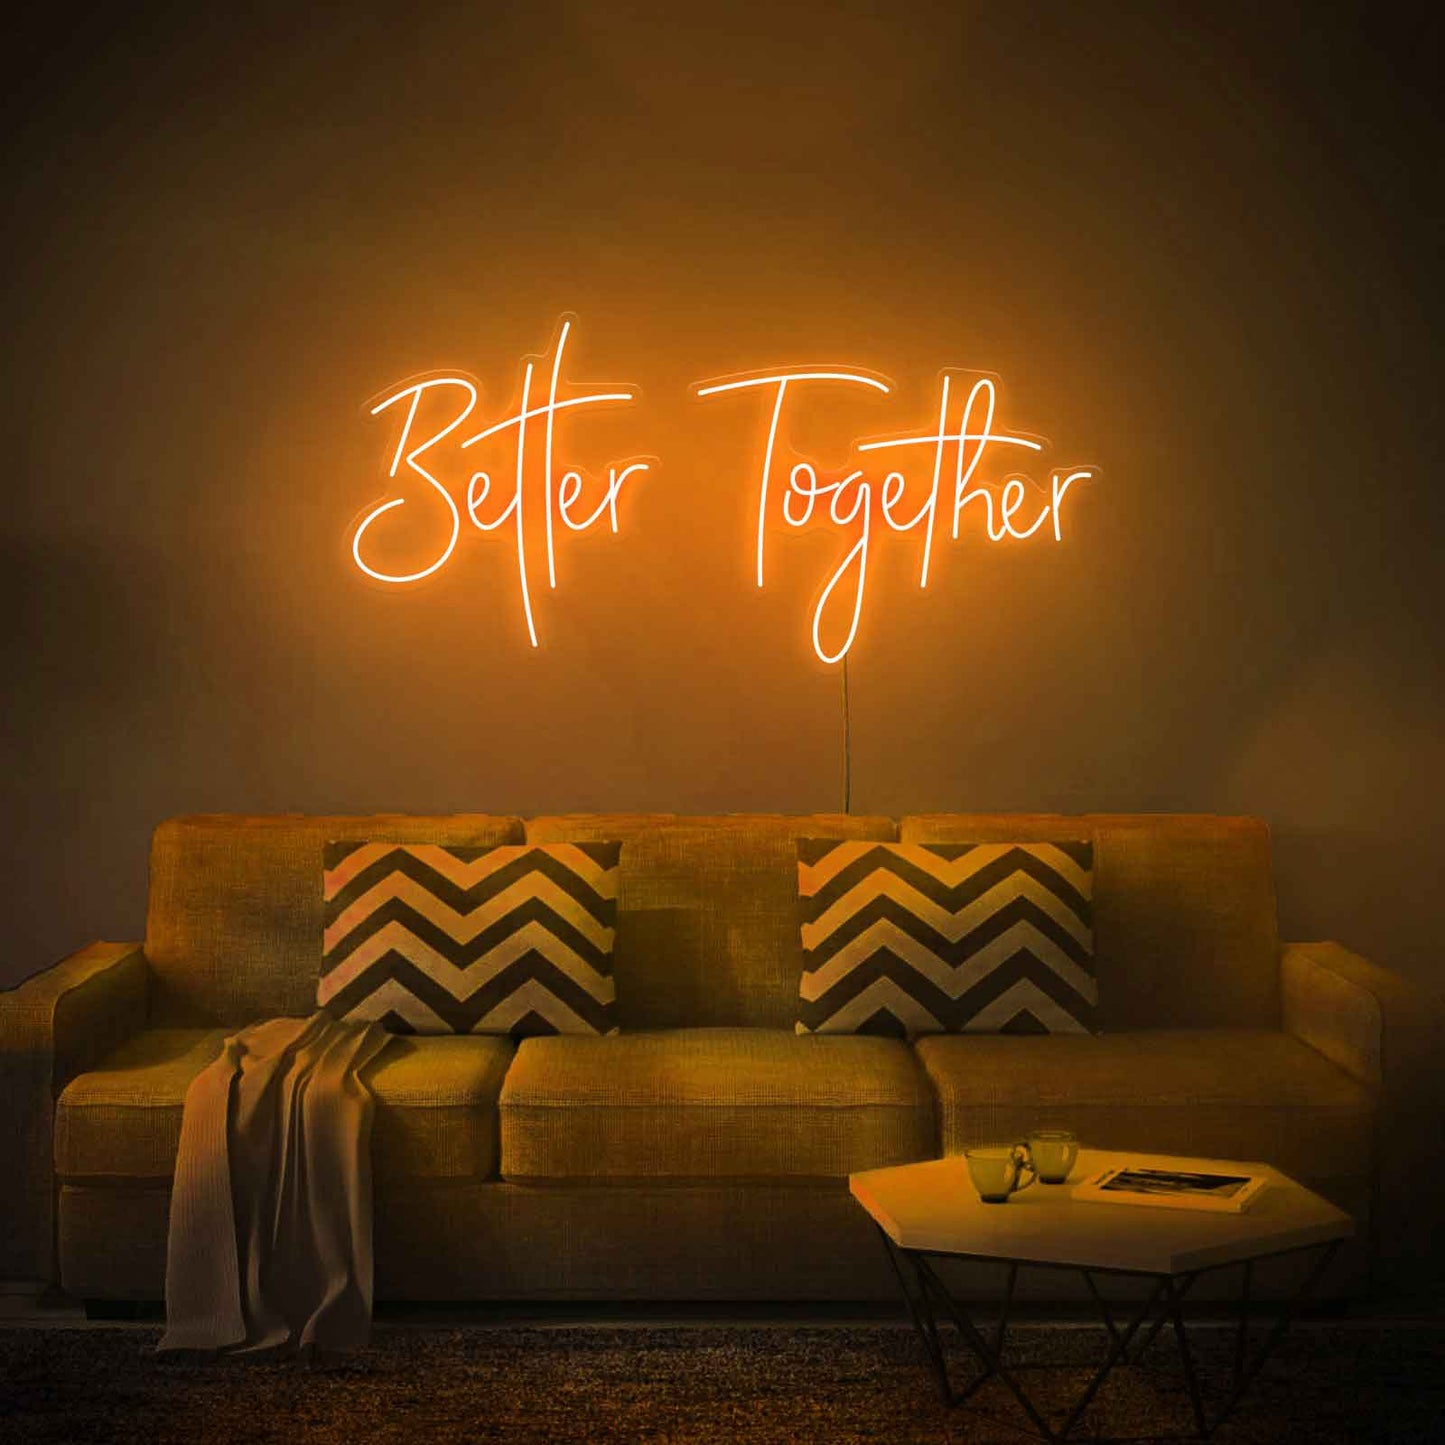 Better together Neon Sign